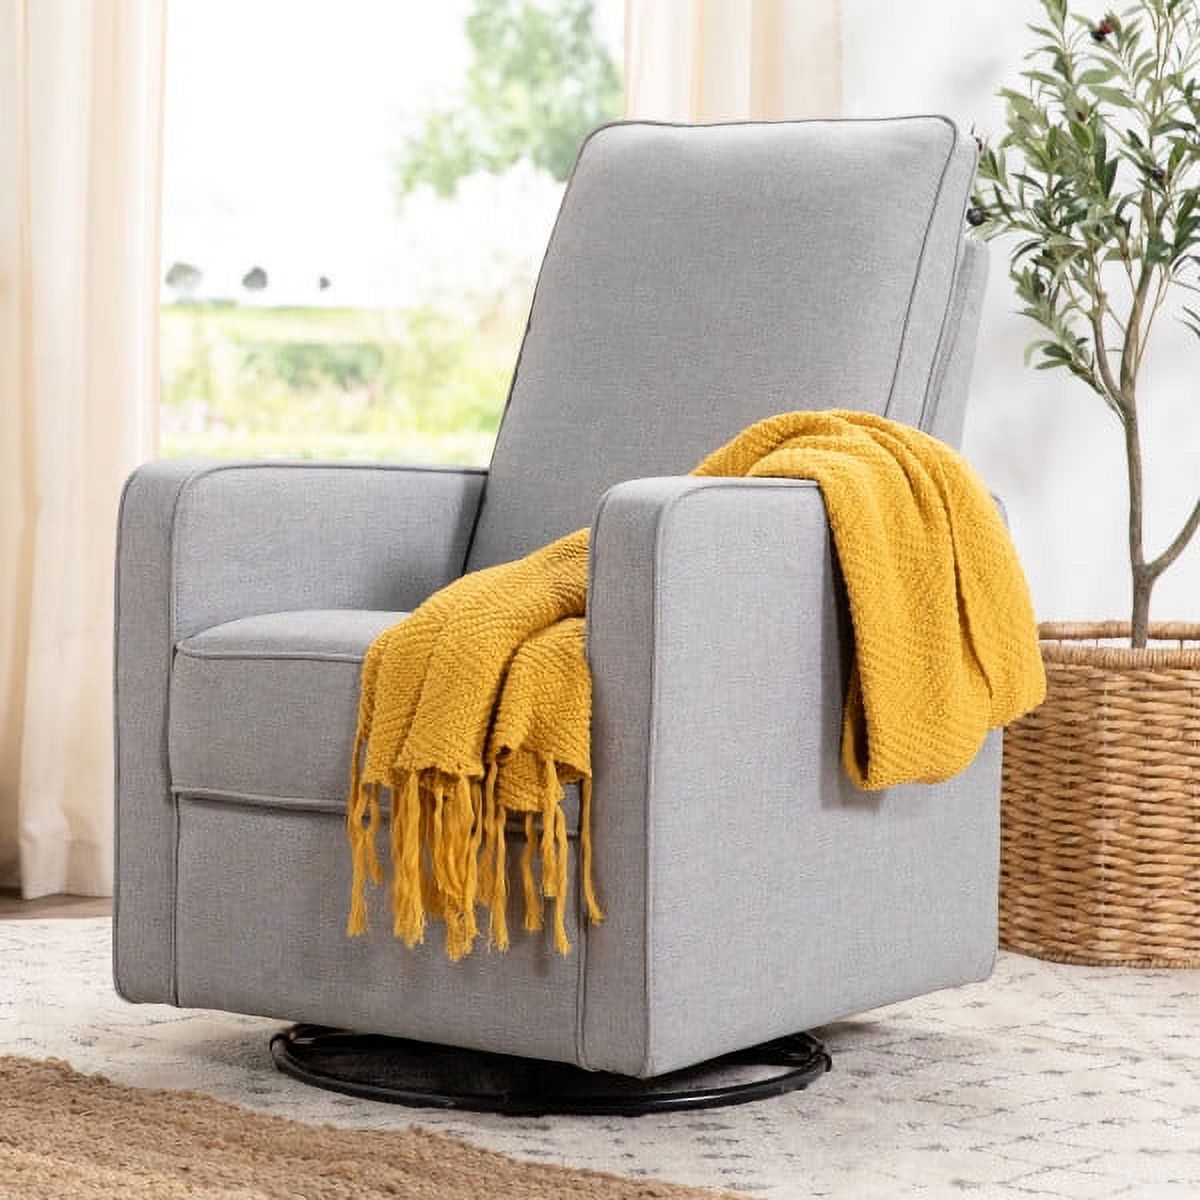 DaVinci Casey Pillowback Swivel Glider Chair in Misty Gray - image 1 of 7